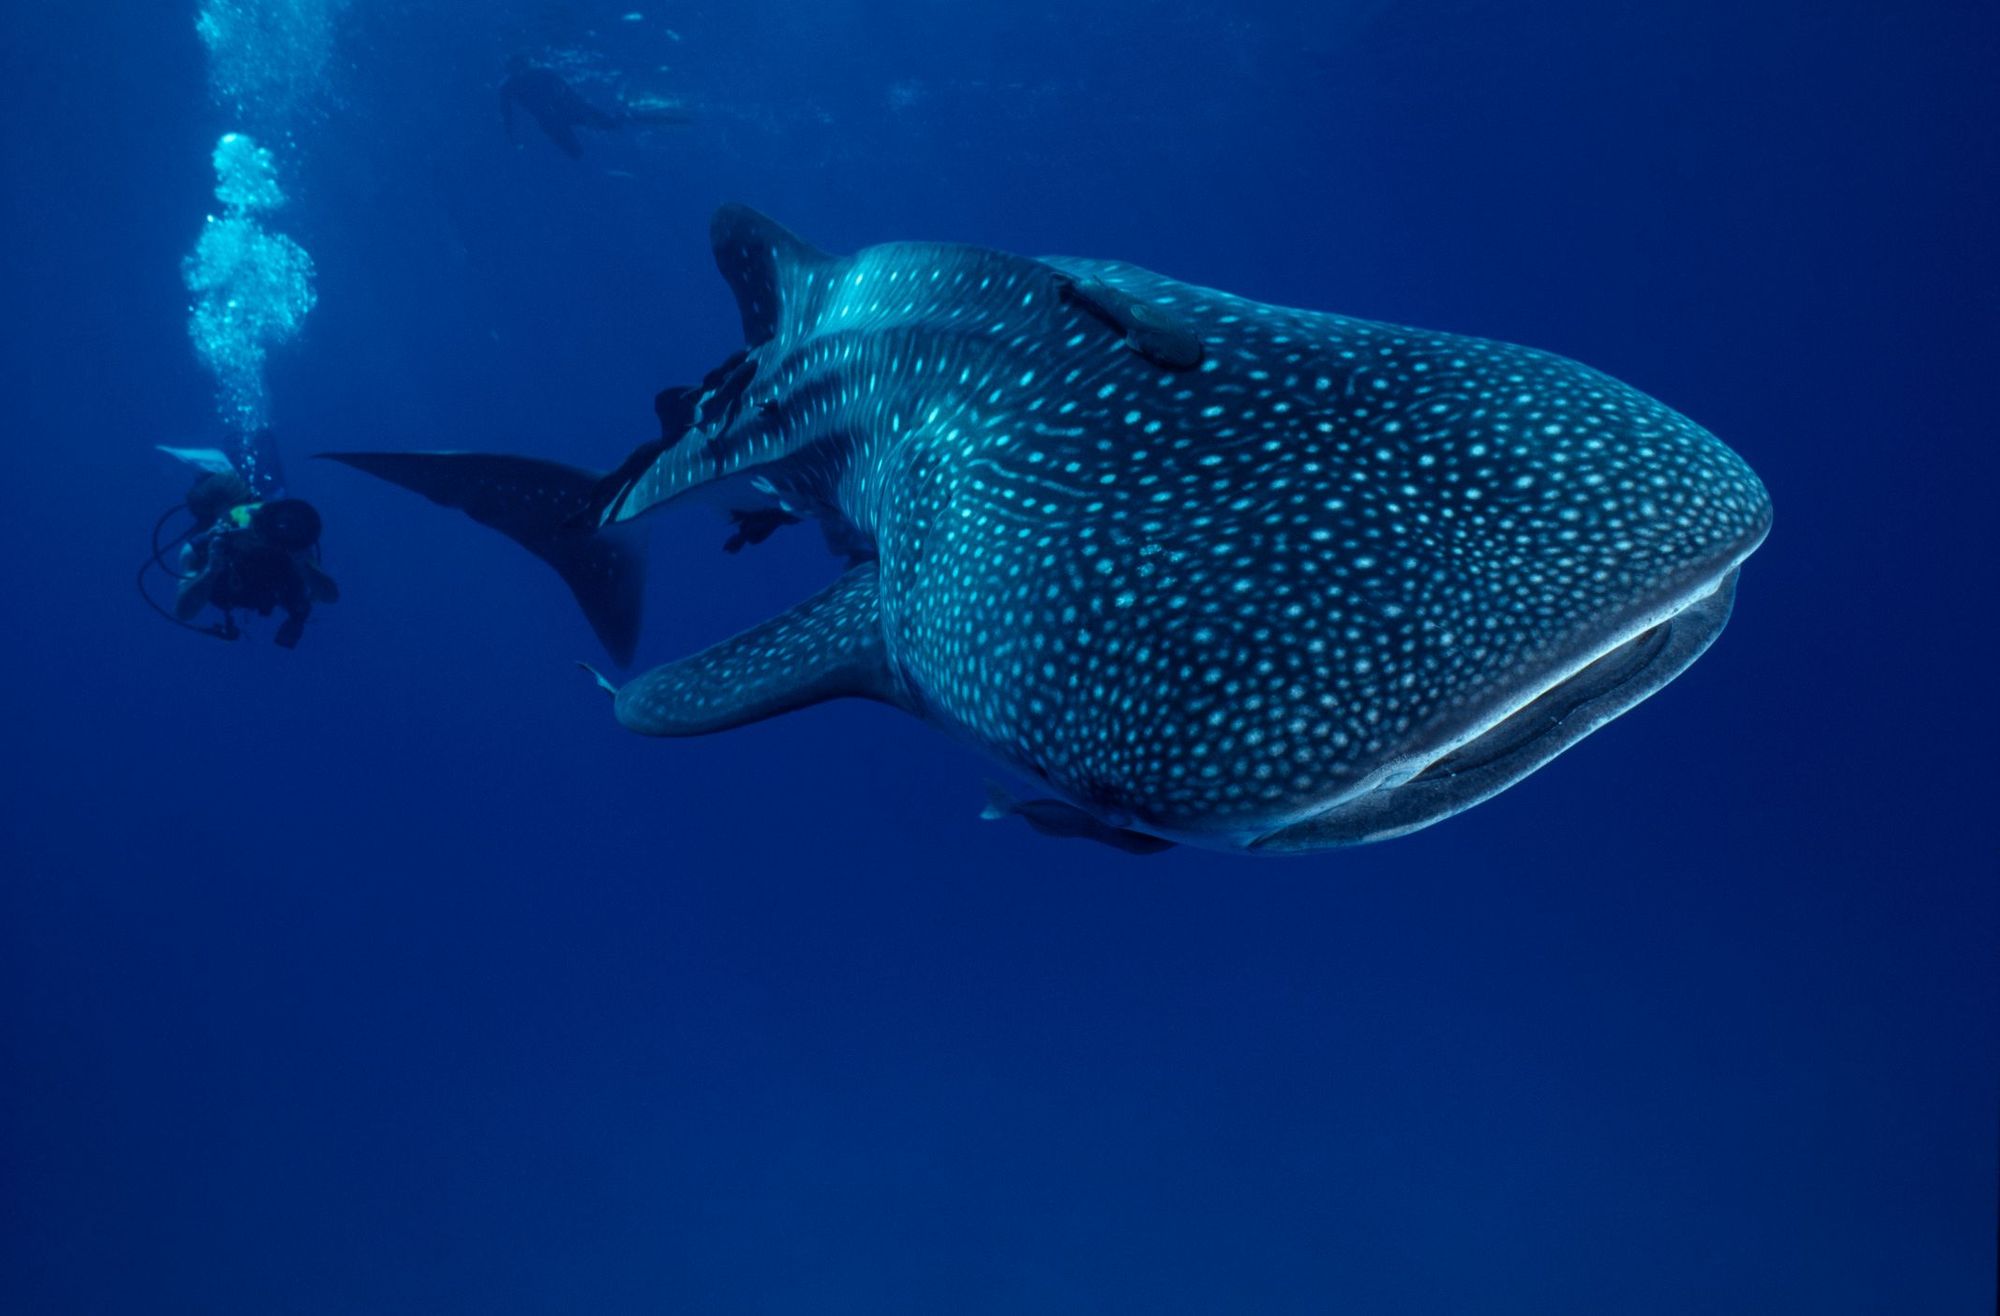 A diver shows the sheer scale of an enormous whale shark in the Sea of Cortez. Photo: Getty